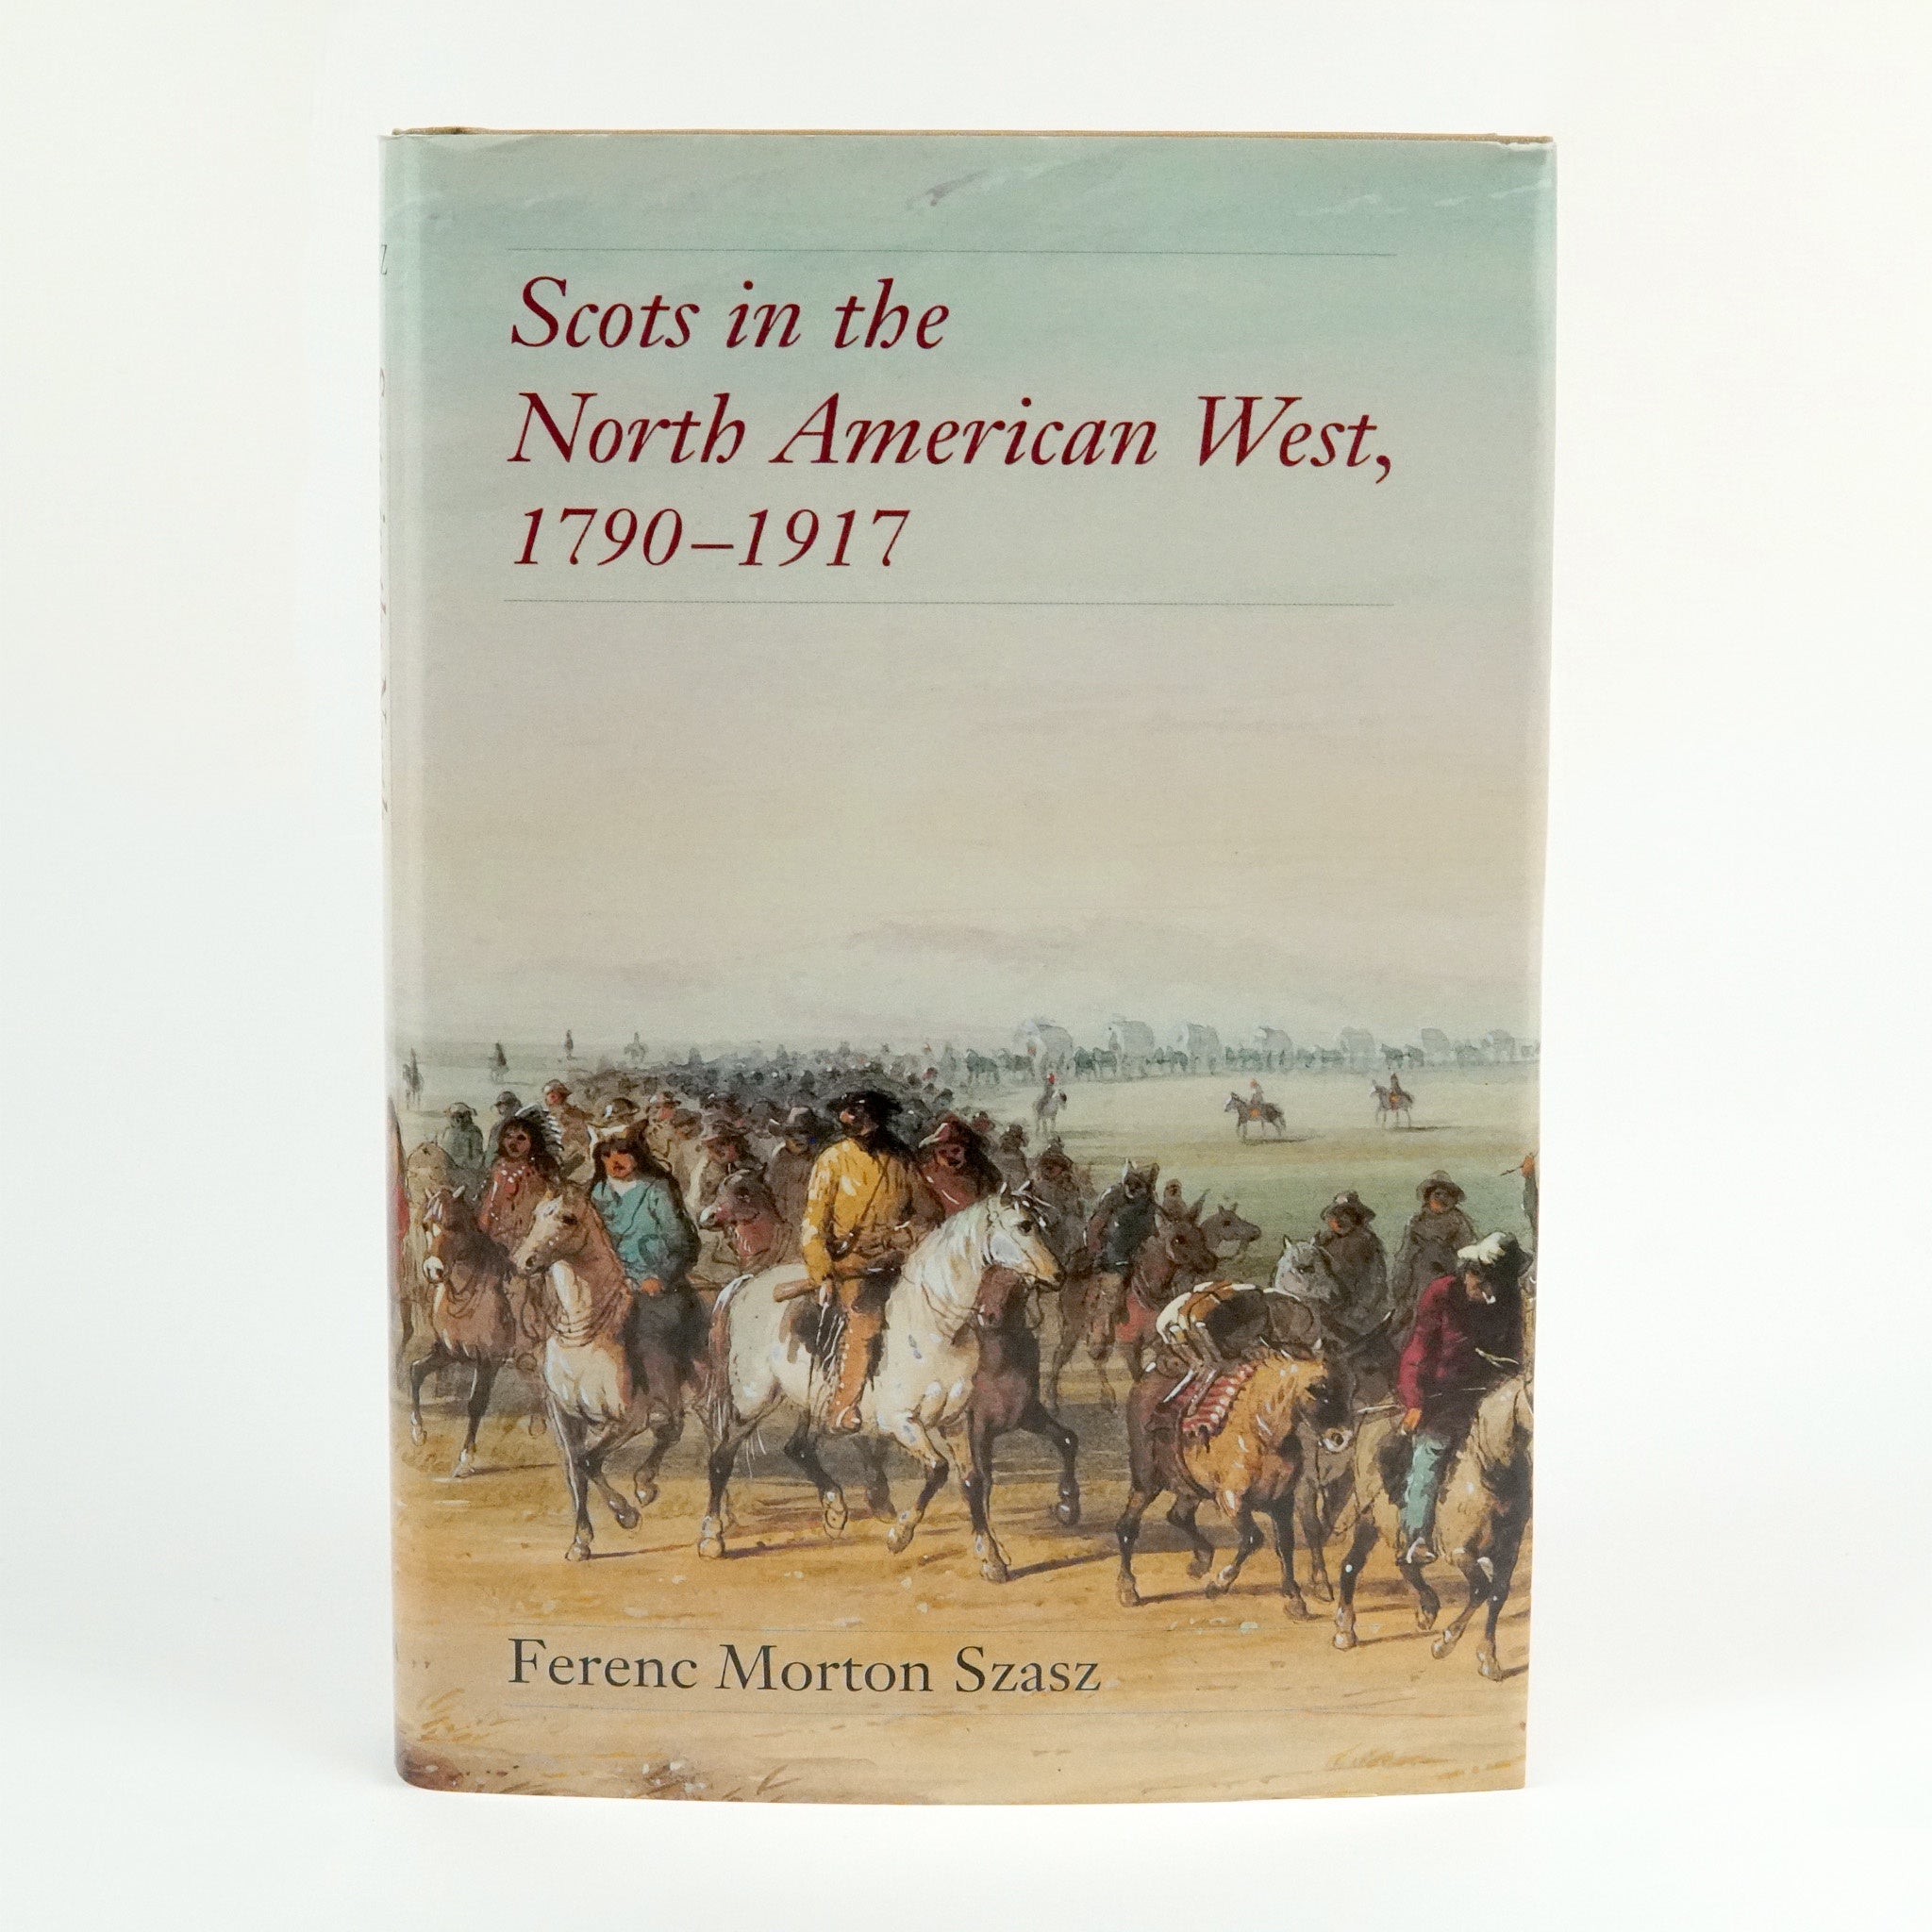 BK 7 SCOTS IN THE NORTH AMERICAN WEST 1790-1917 BY FERENC MORTON SZASZ #17532 D2 MAR24